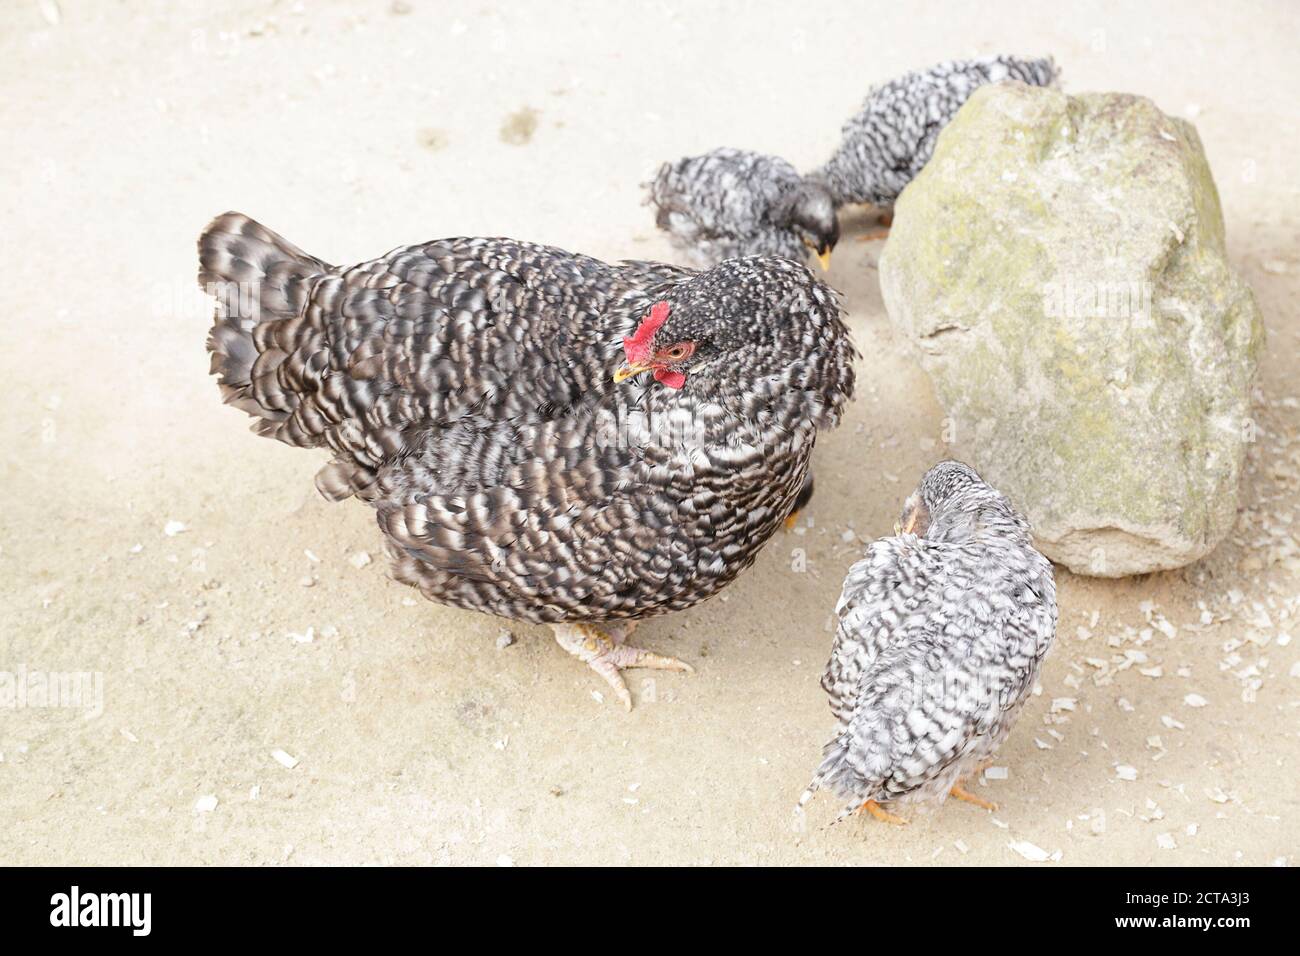 Mother Chicken High Resolution Stock Photography and Images   Alamy